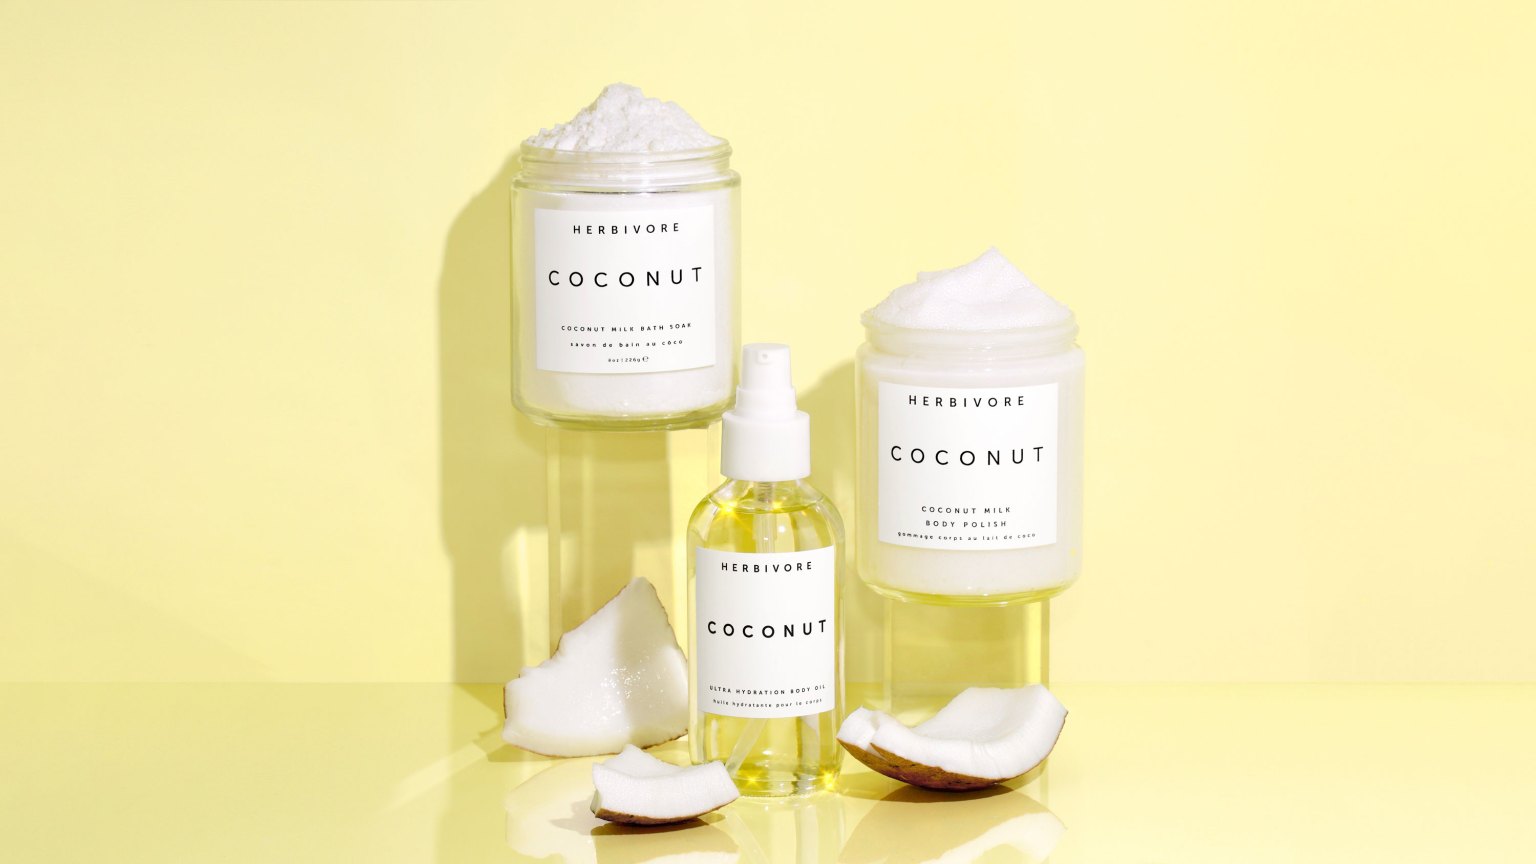 Care For Your Skin with Coconut